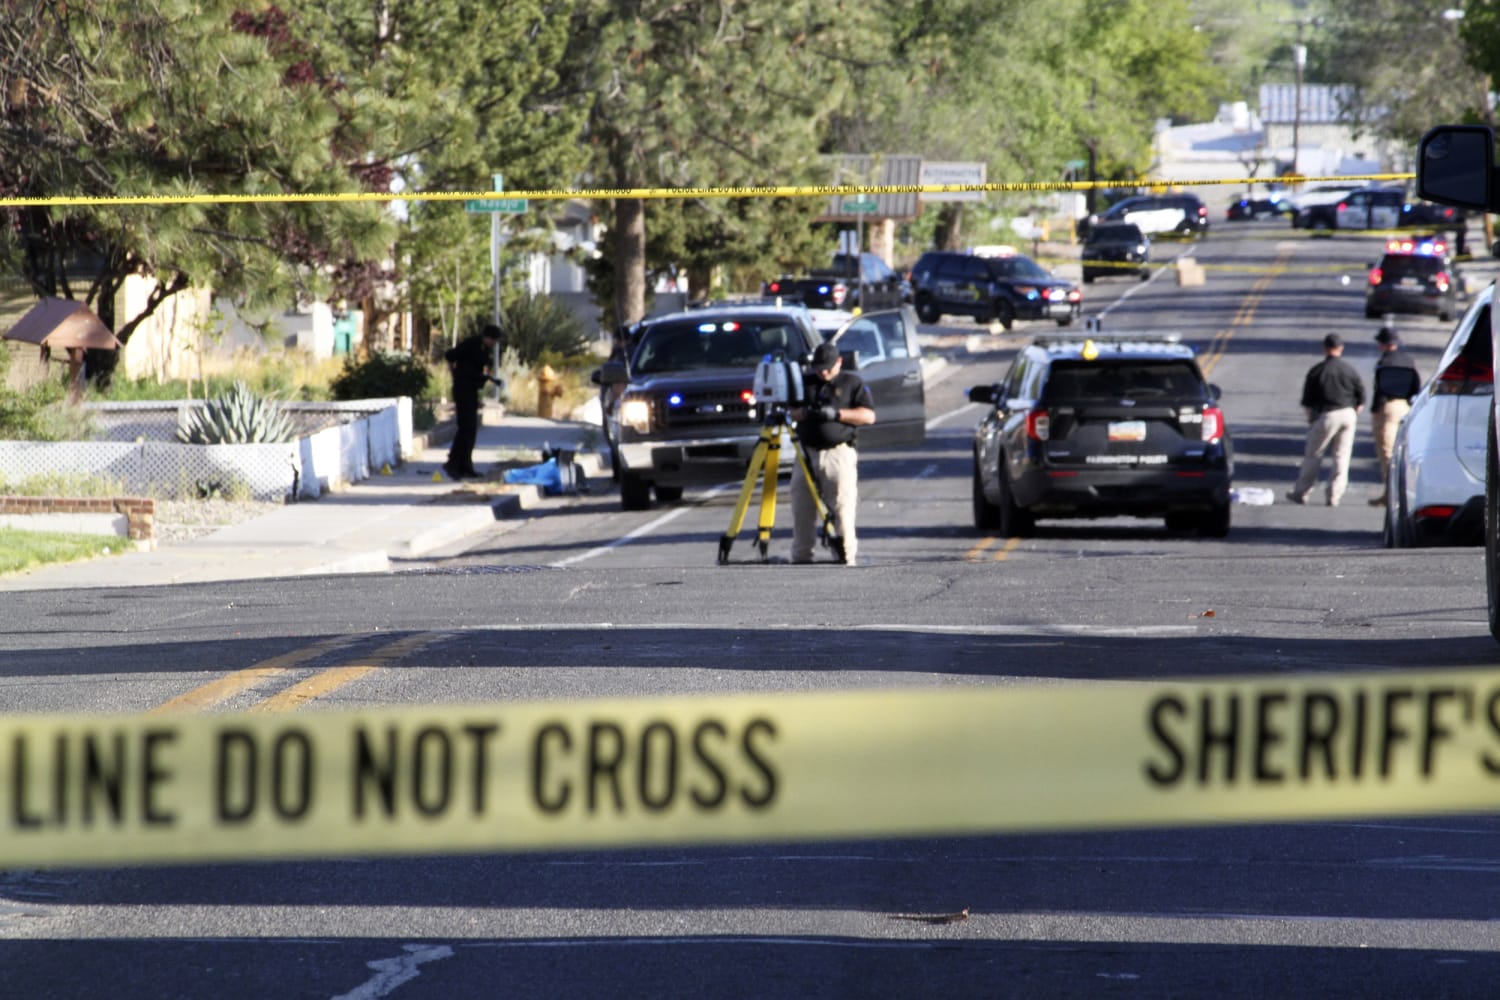 Videos and 911 calls capture the frantic response to a deadly New Mexico rampage